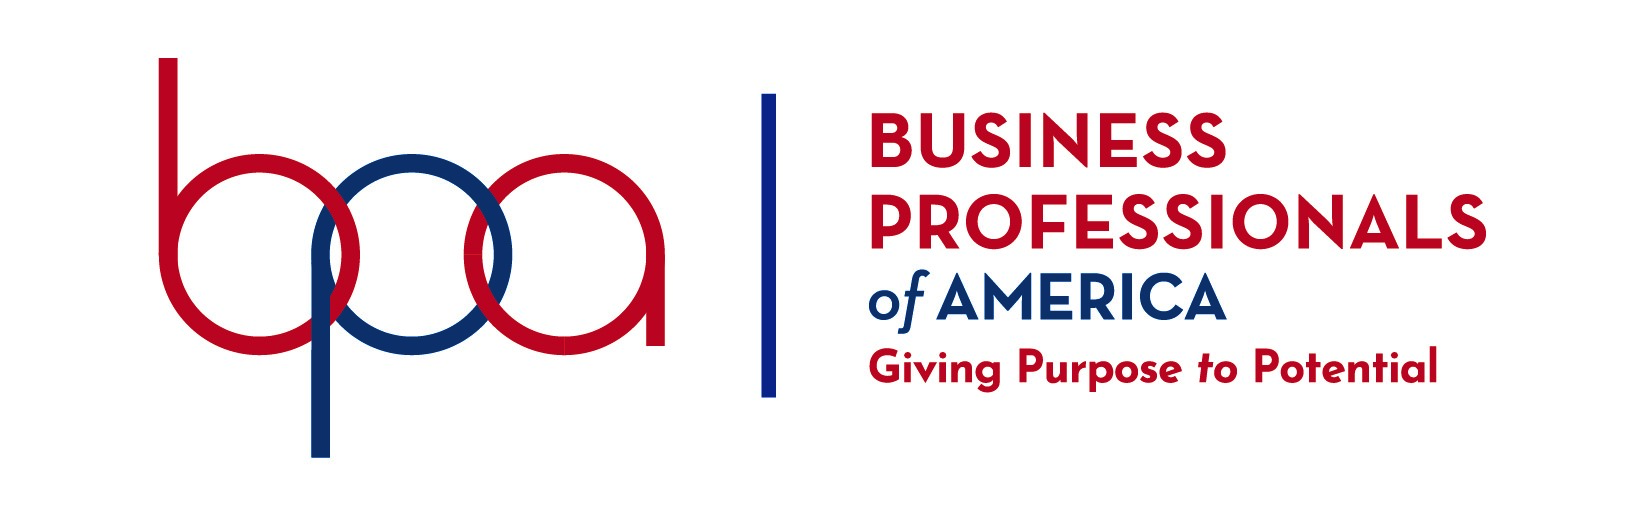 Business Professionals of America Logo - BPA - Giving Purpose to Potential